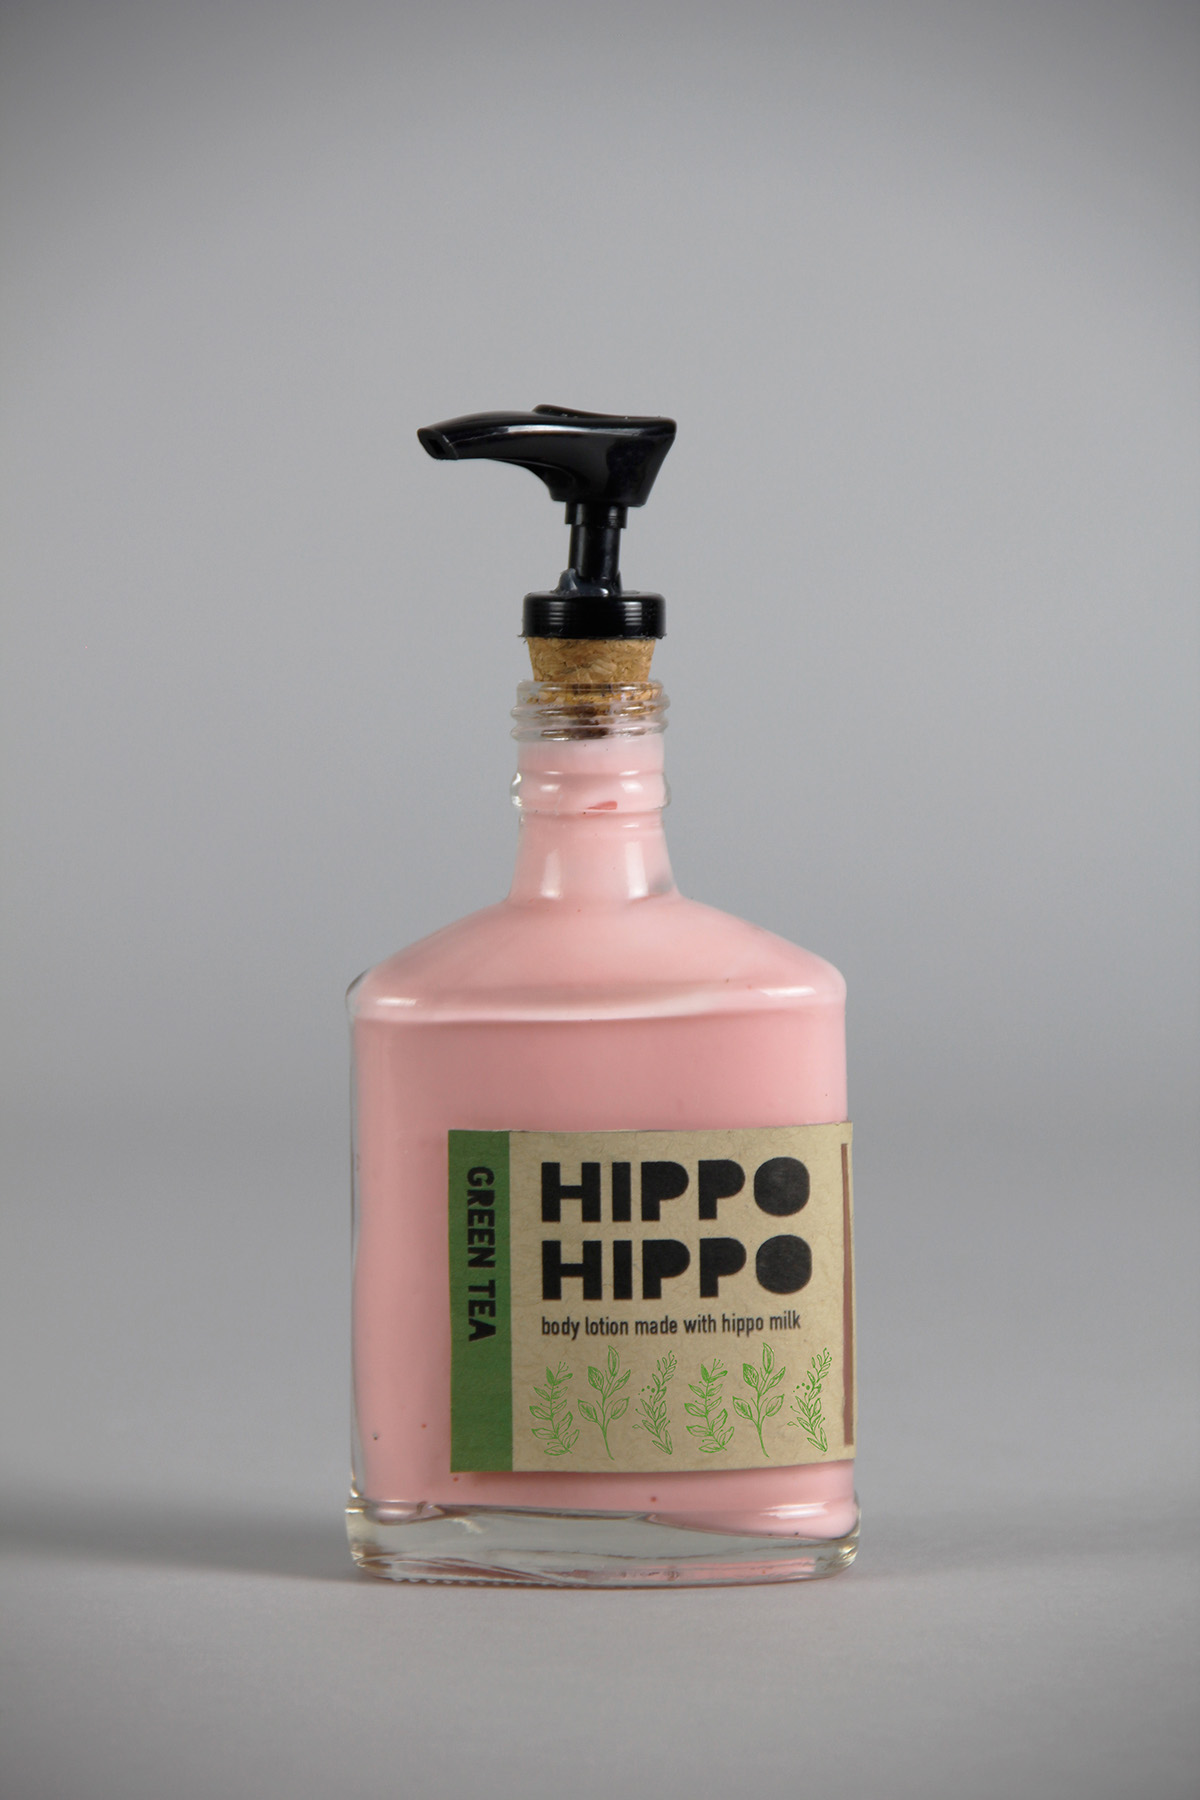 package Hipster body lotion product eco-friendly craft hippo